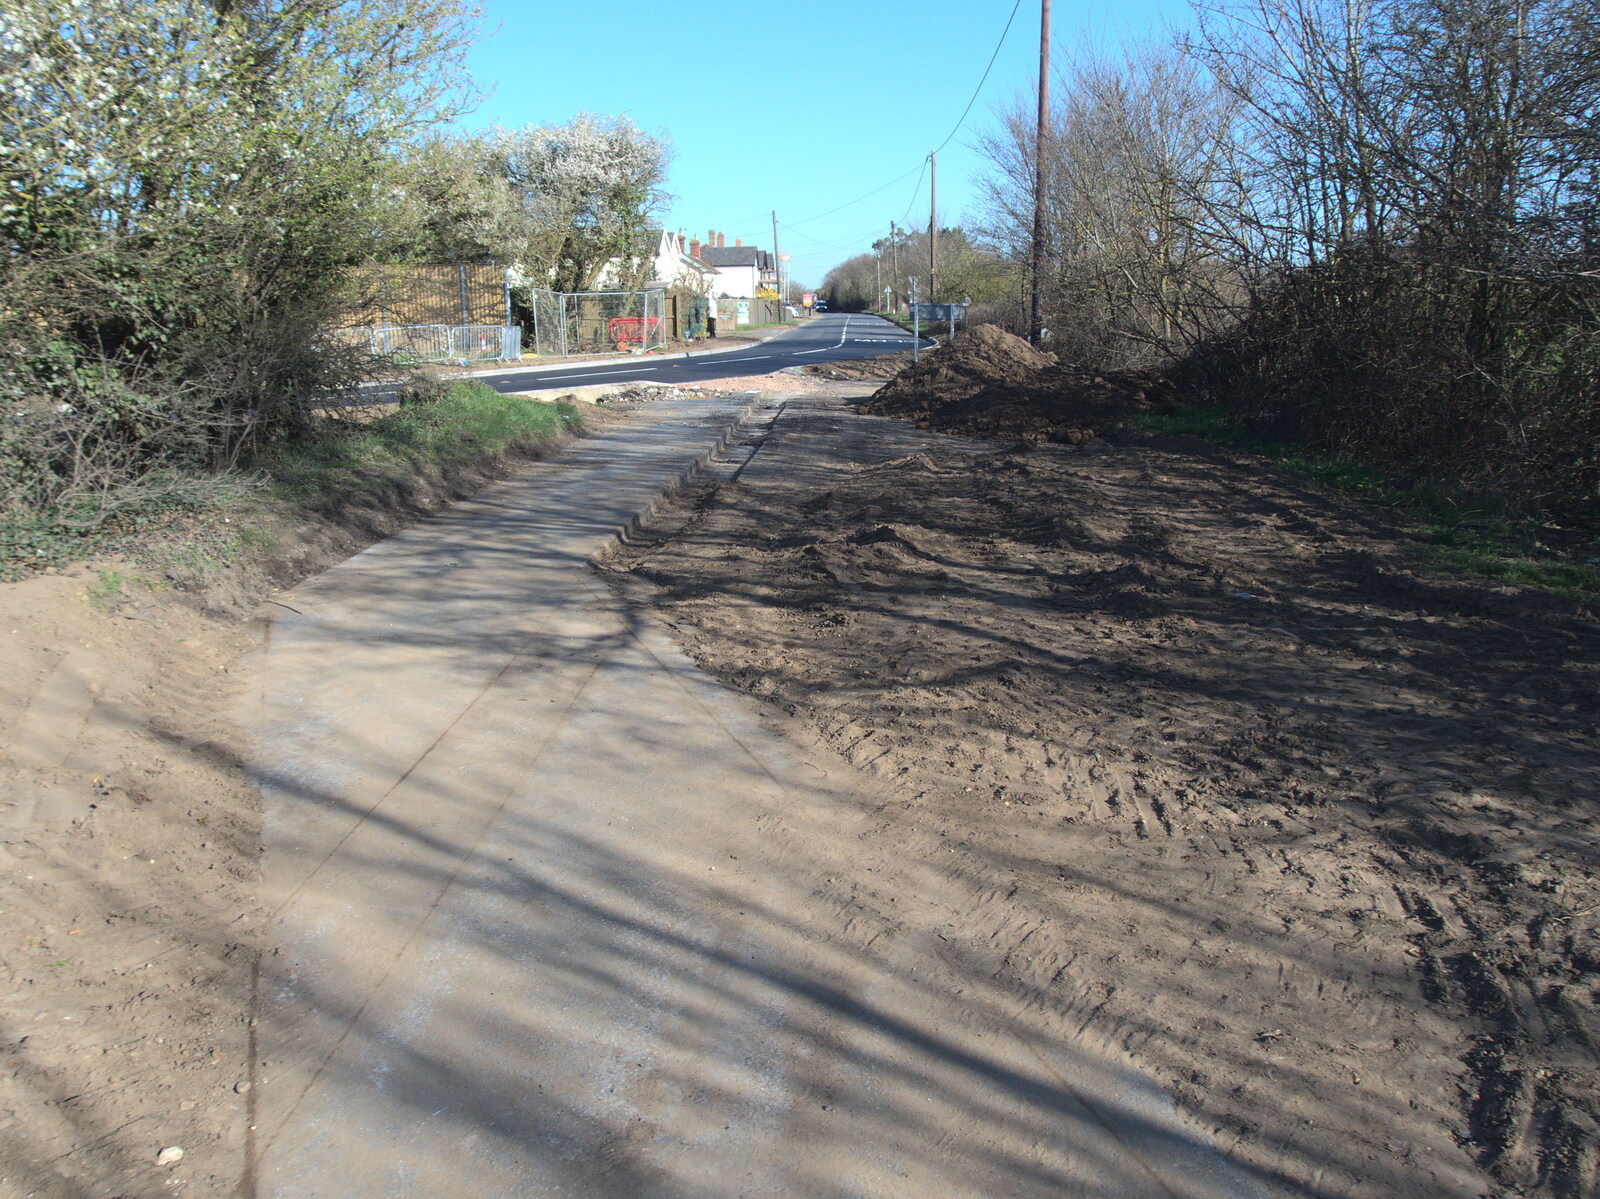 The new/old bike lane again from Roadworks and Harry's Trampoline, Brome, Suffolk - 6th April 2021